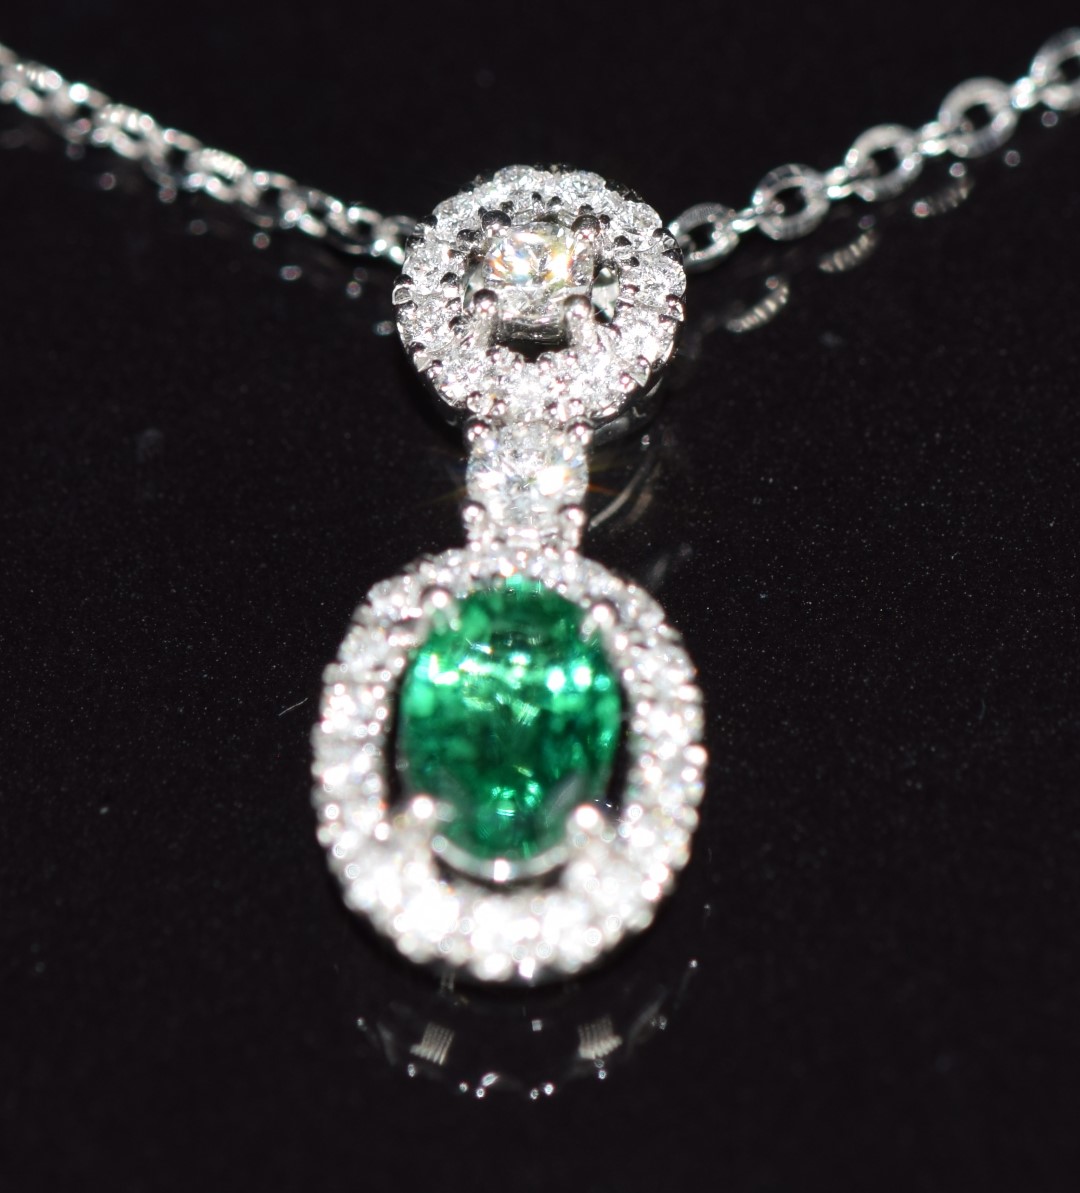 An 18ct white gold pendant set with an oval cut emerald of approximately 0.5ct surrounded by